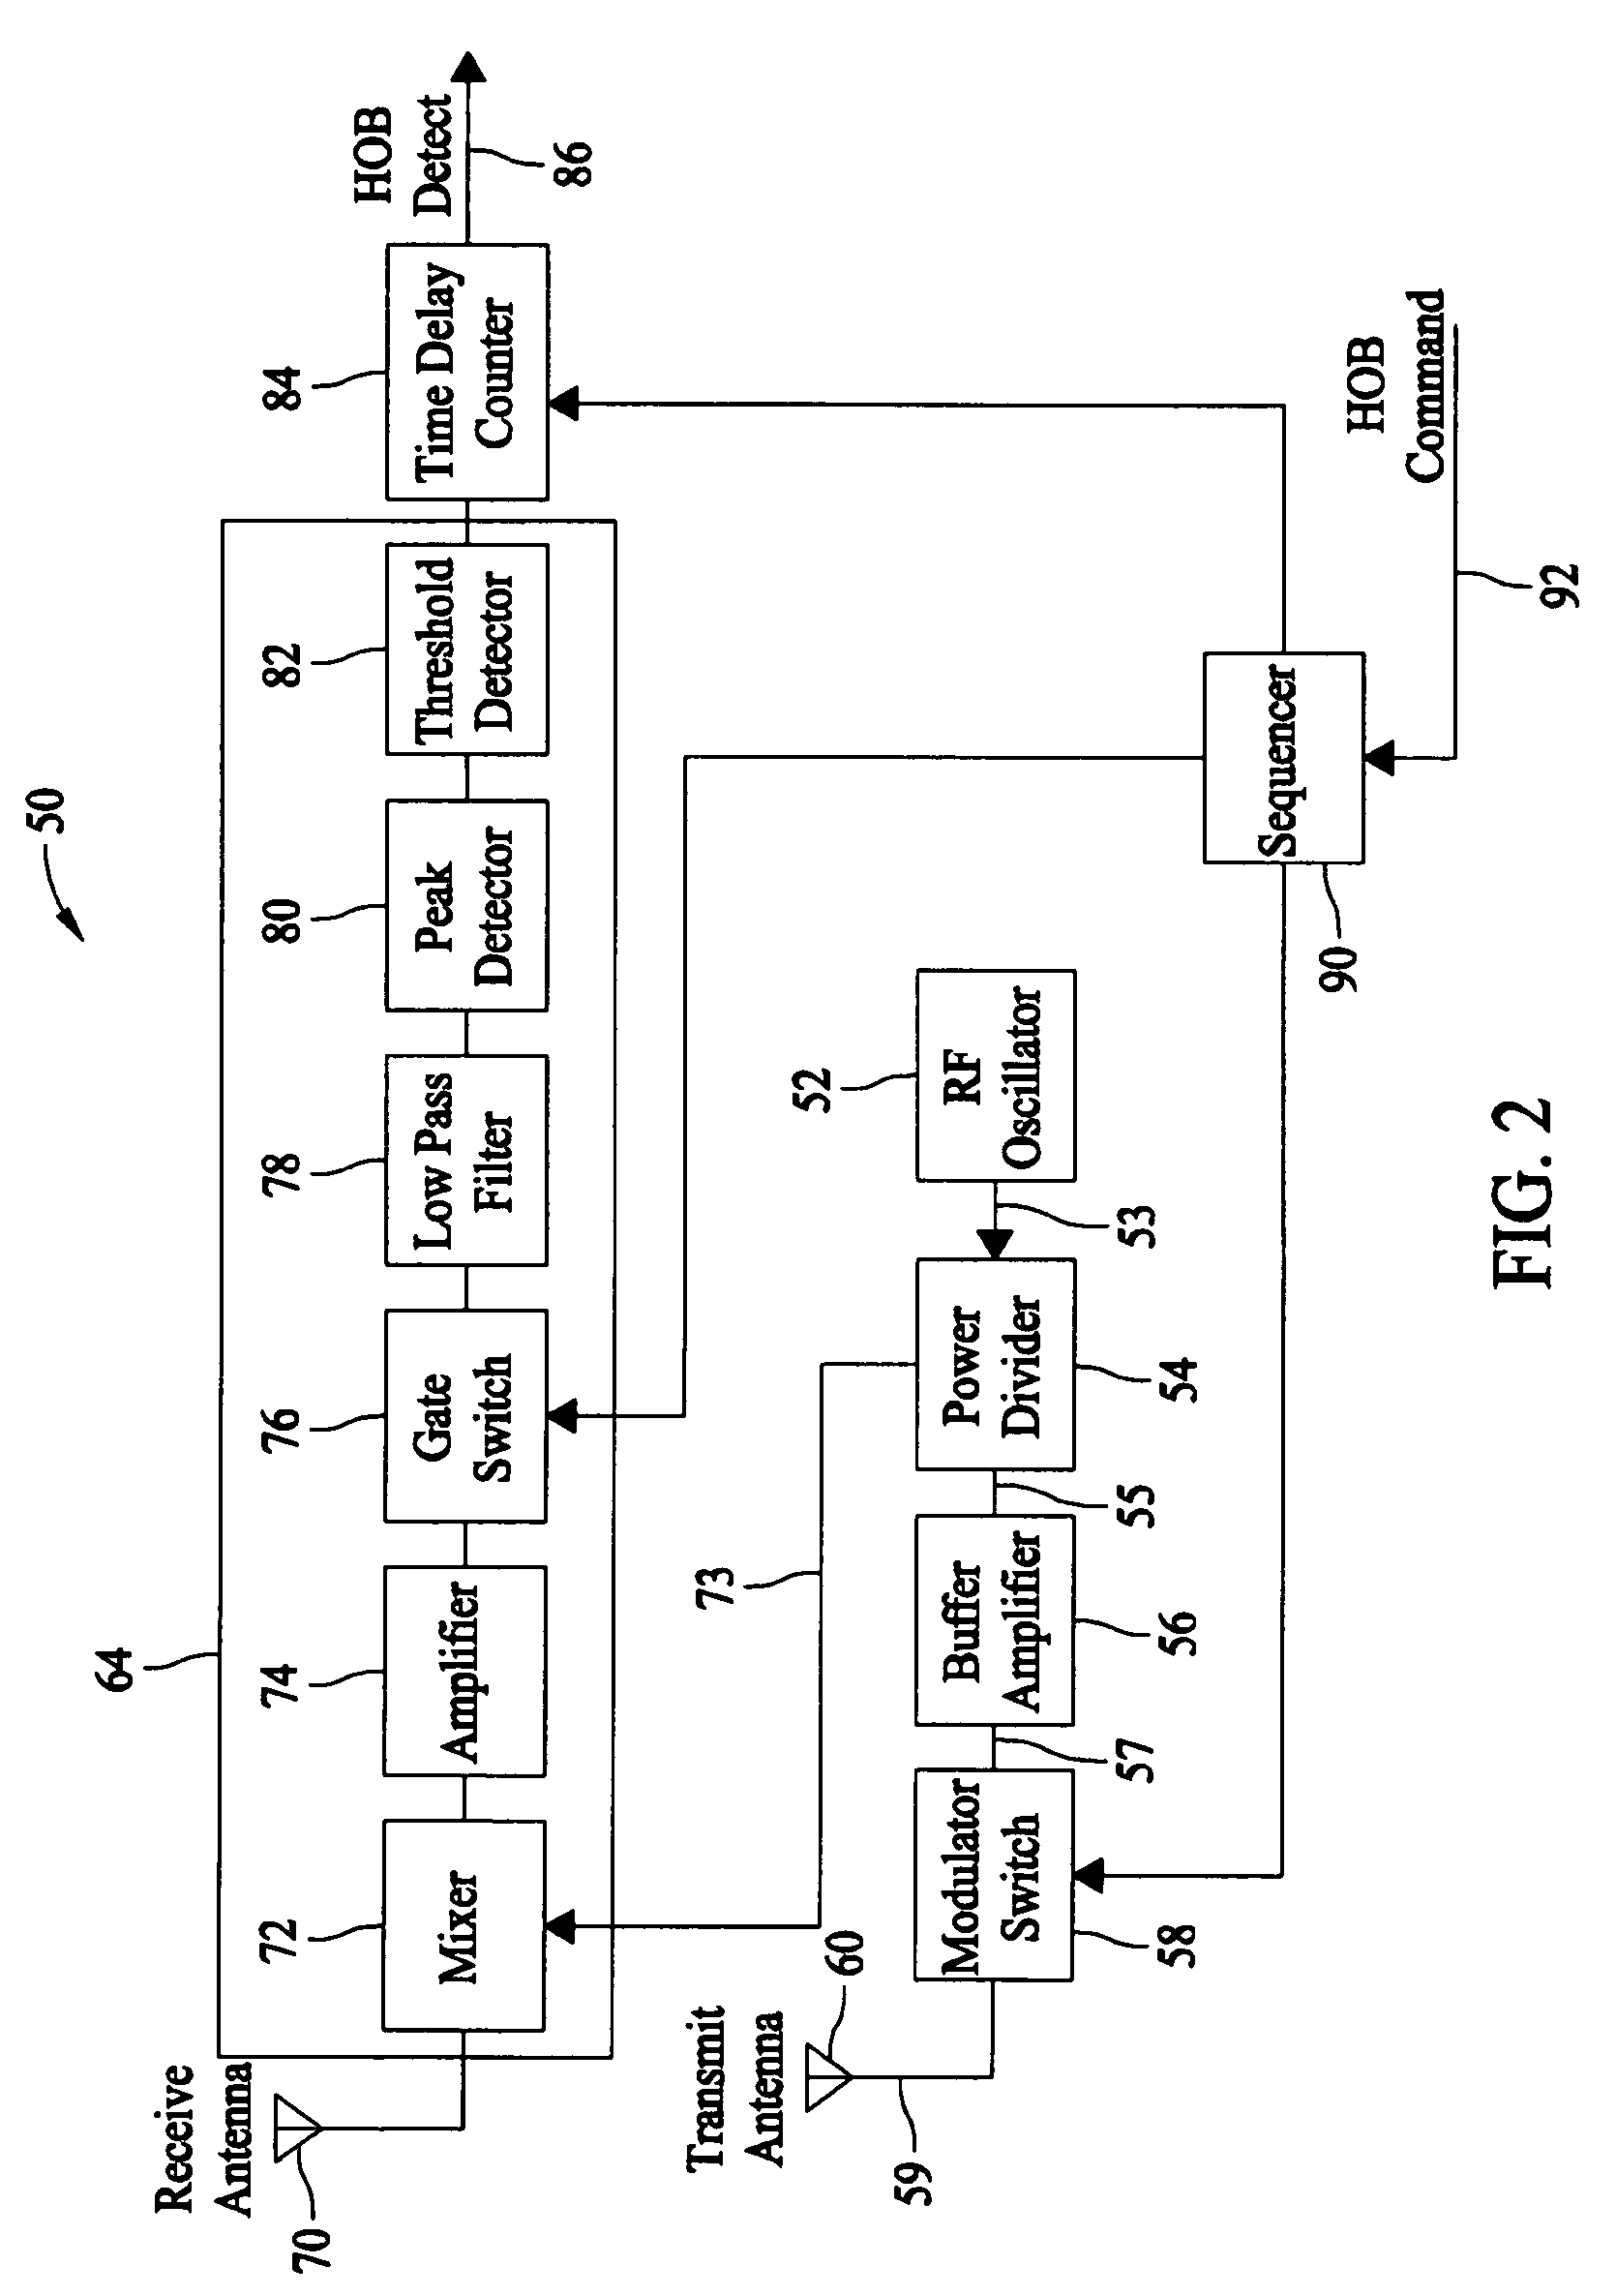 Methods and systems for controlling a height of munition detonation